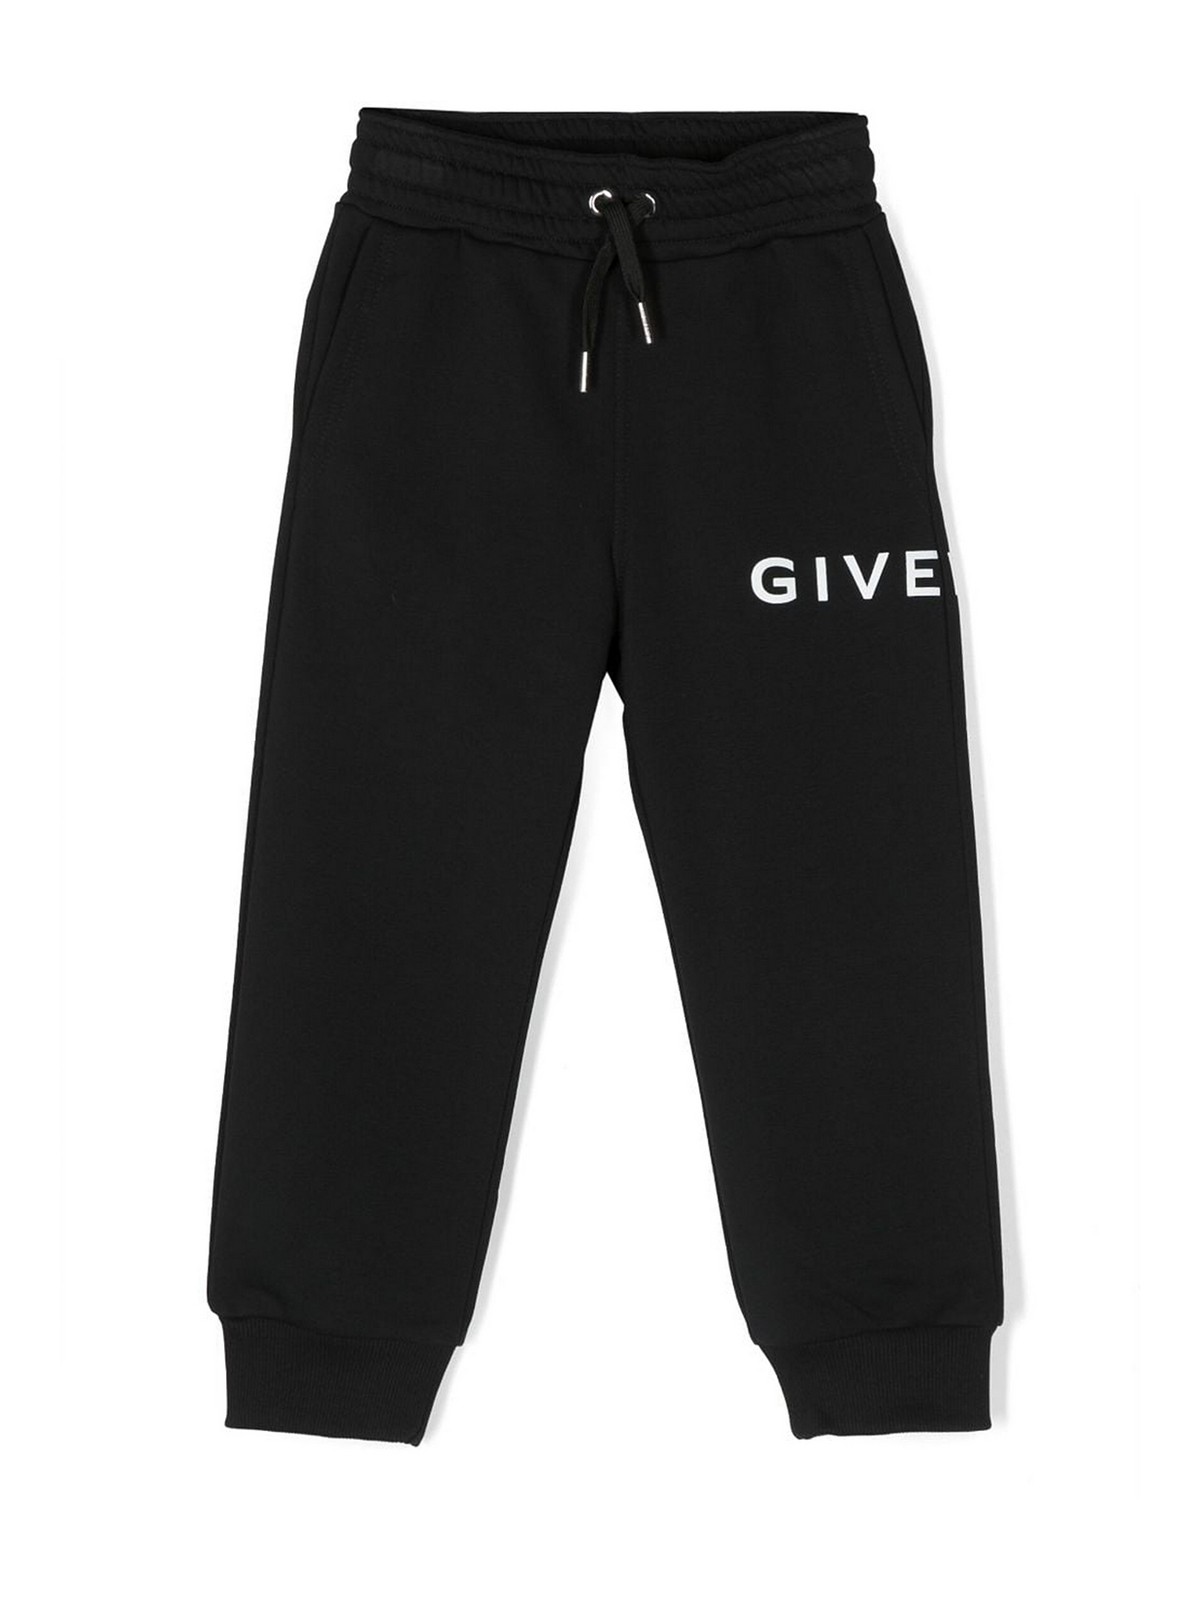 GIVENCHY, Black Women's Casual Pants